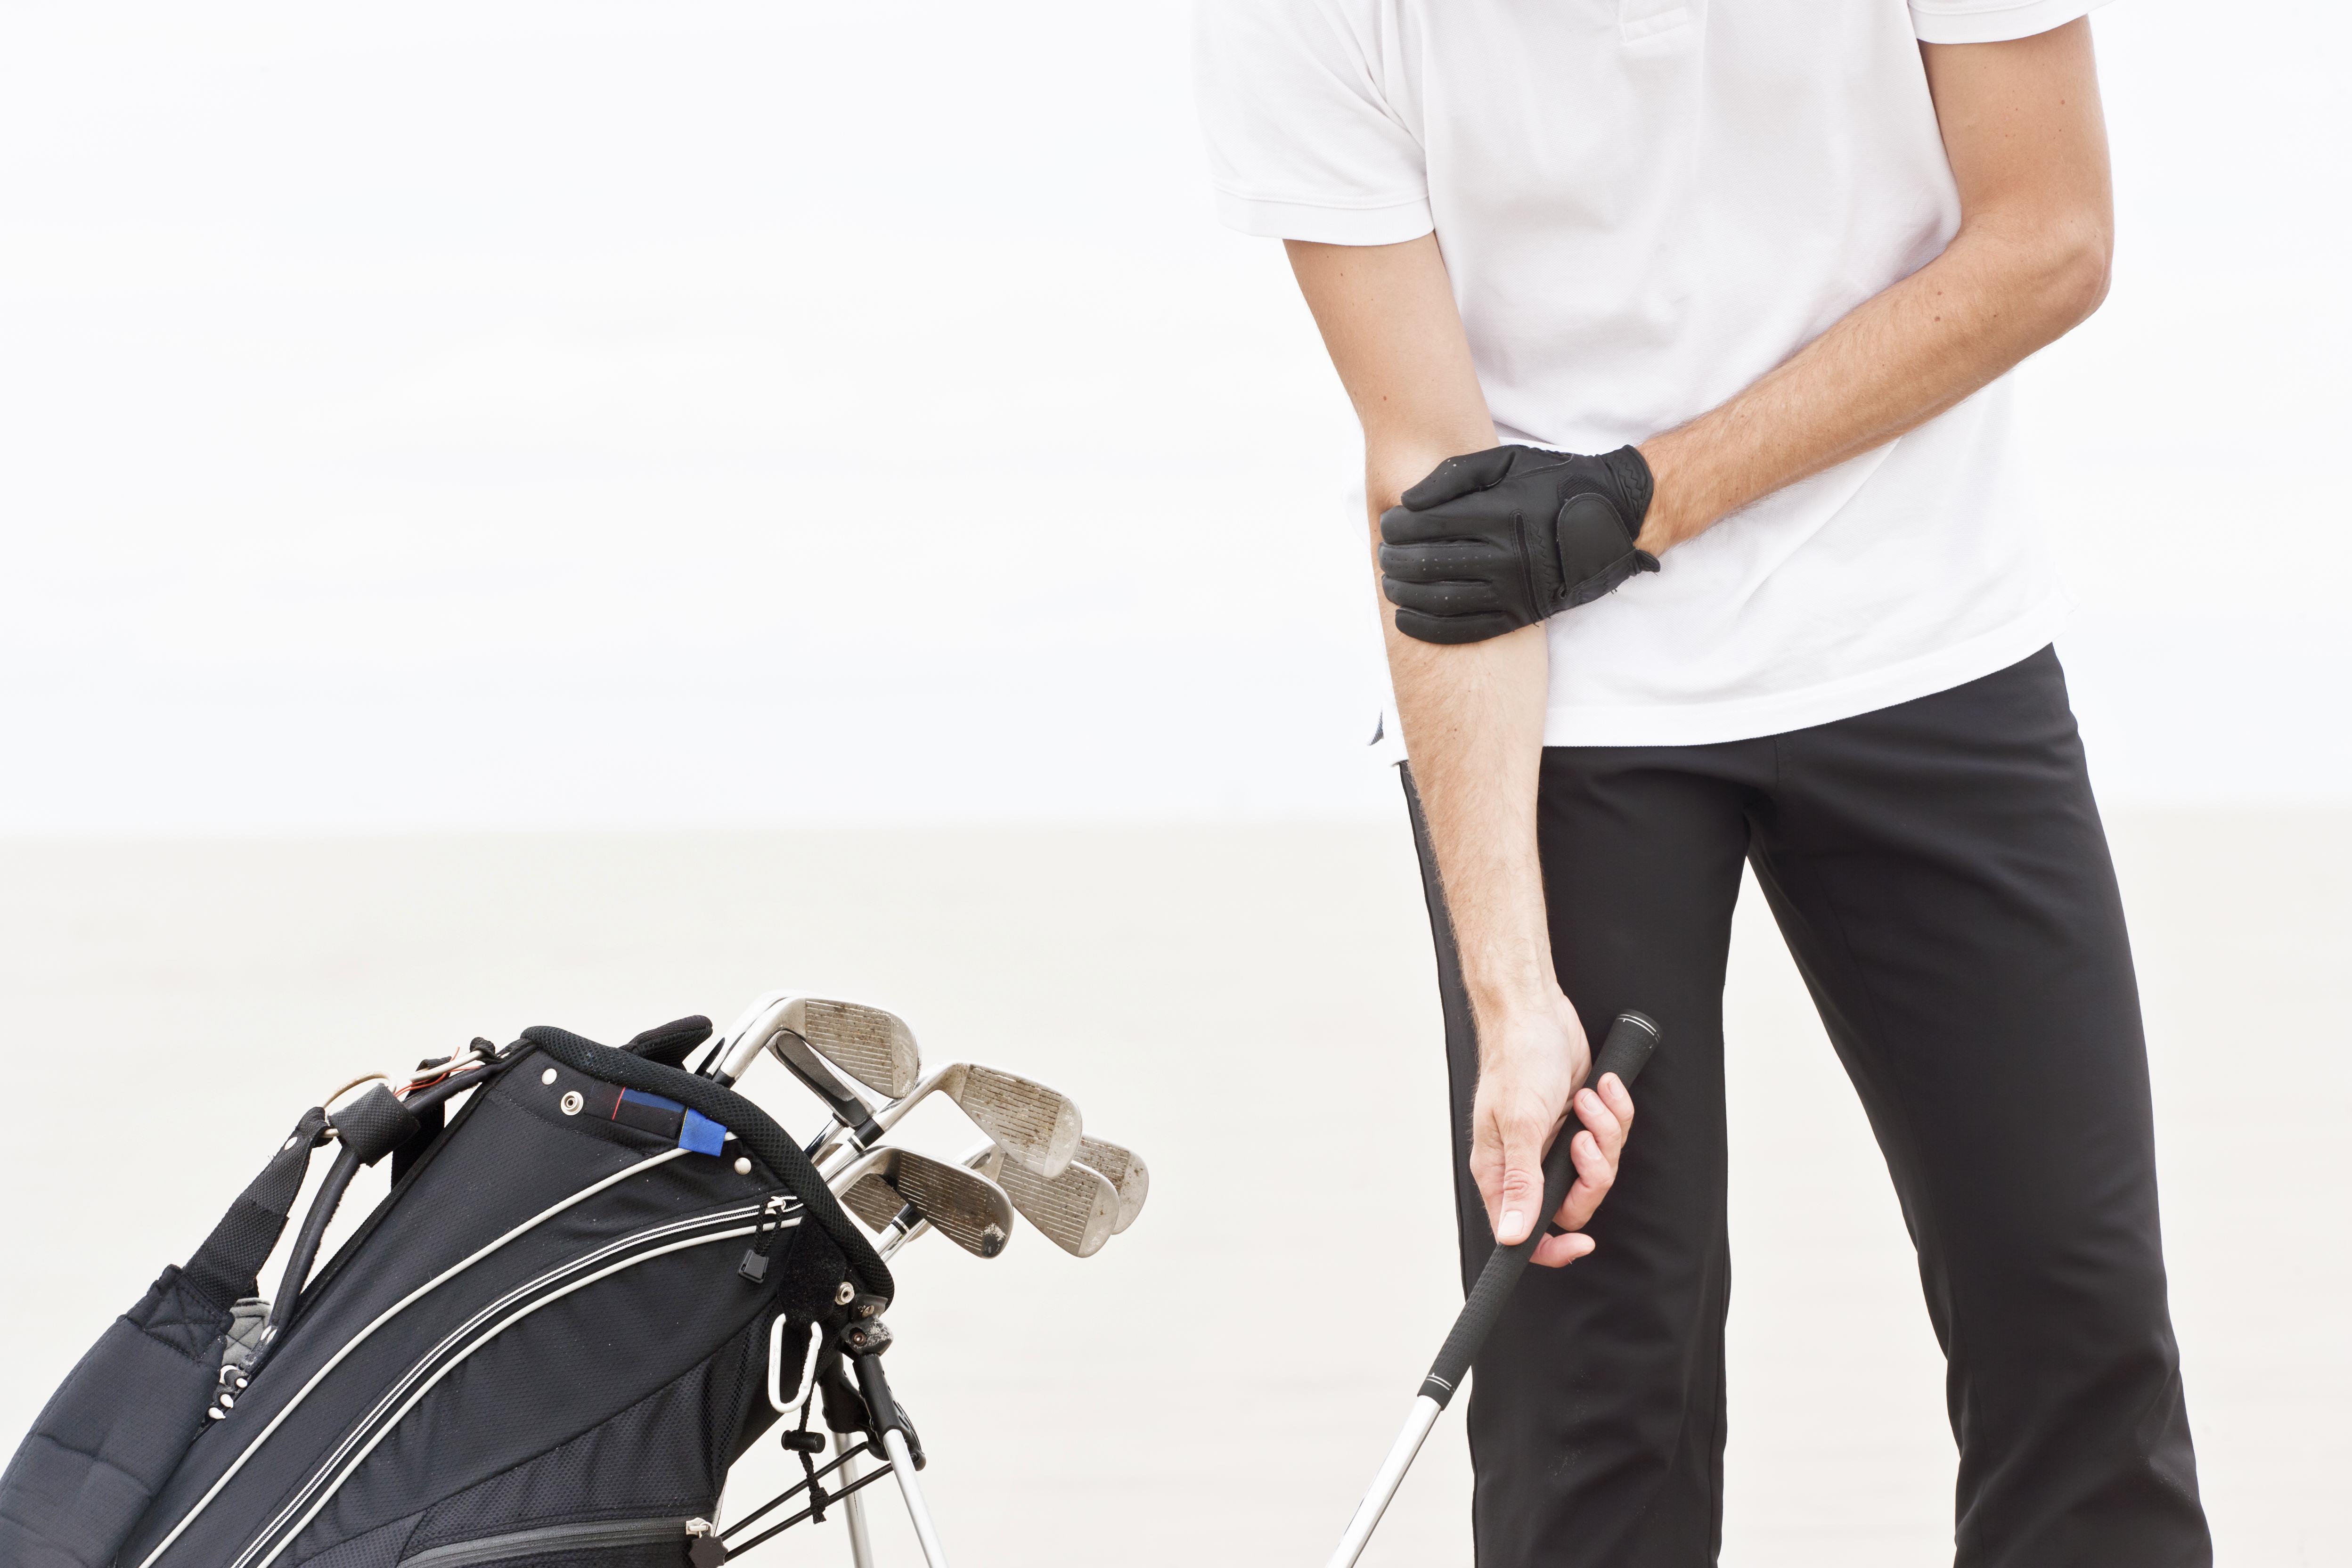 Golfers, Arthritis and Cannabis: What Do We Know?